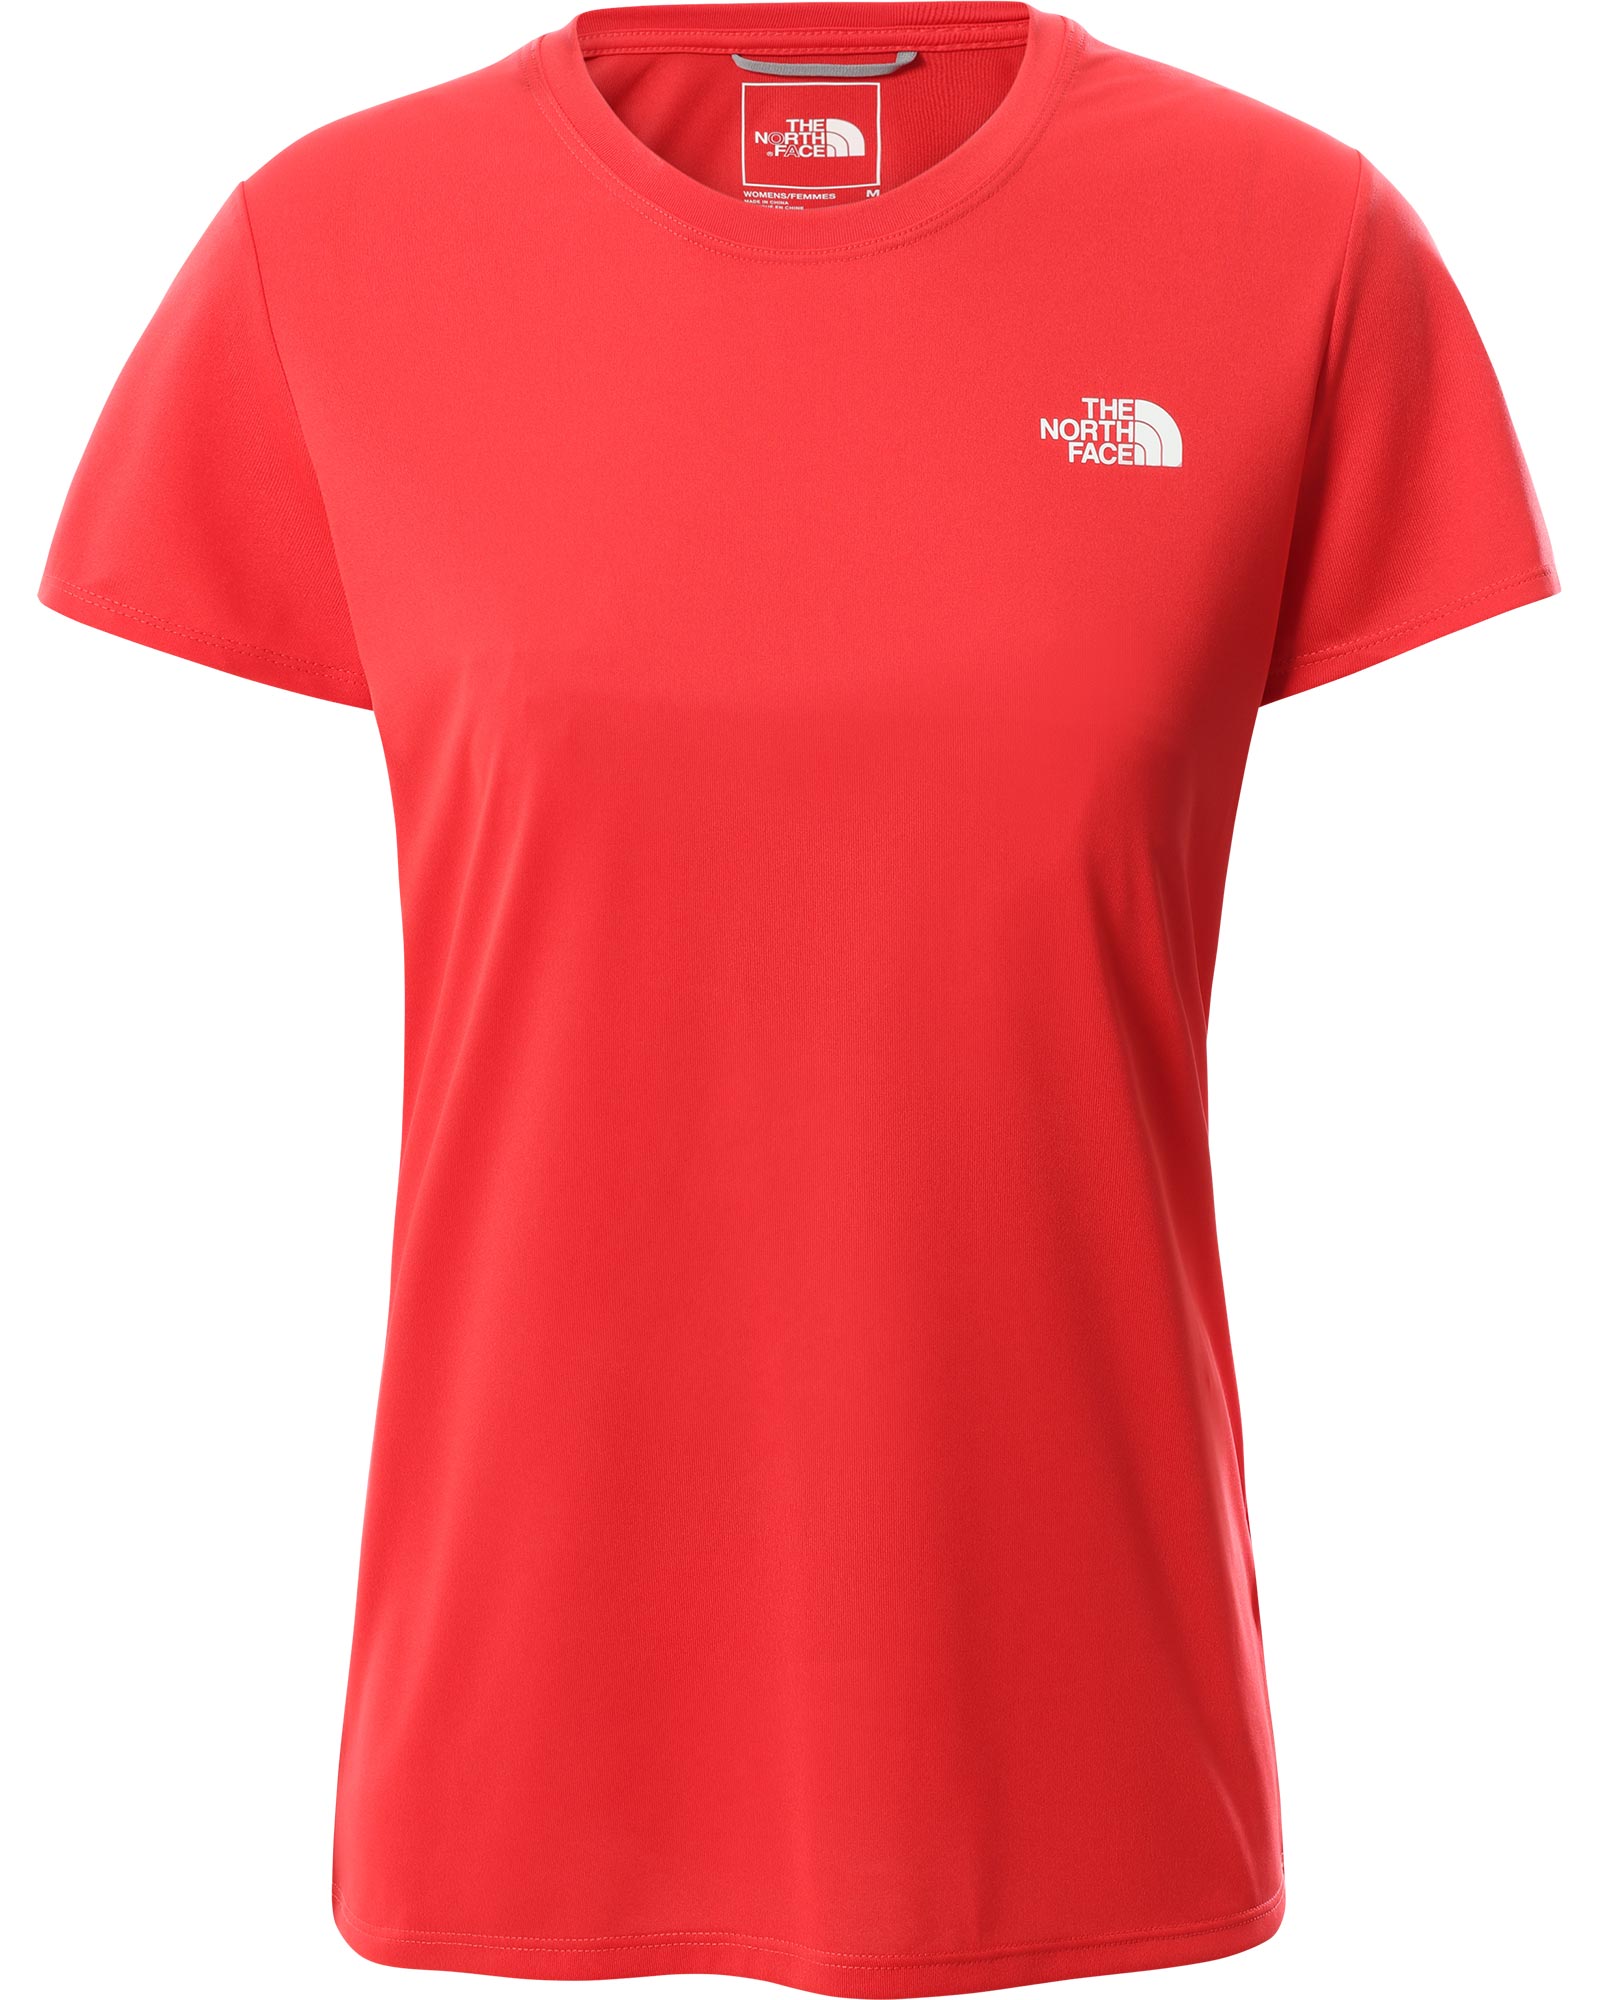 The North Face Reaxion Amp Women’s Crew T Shirt - Horizon Red S